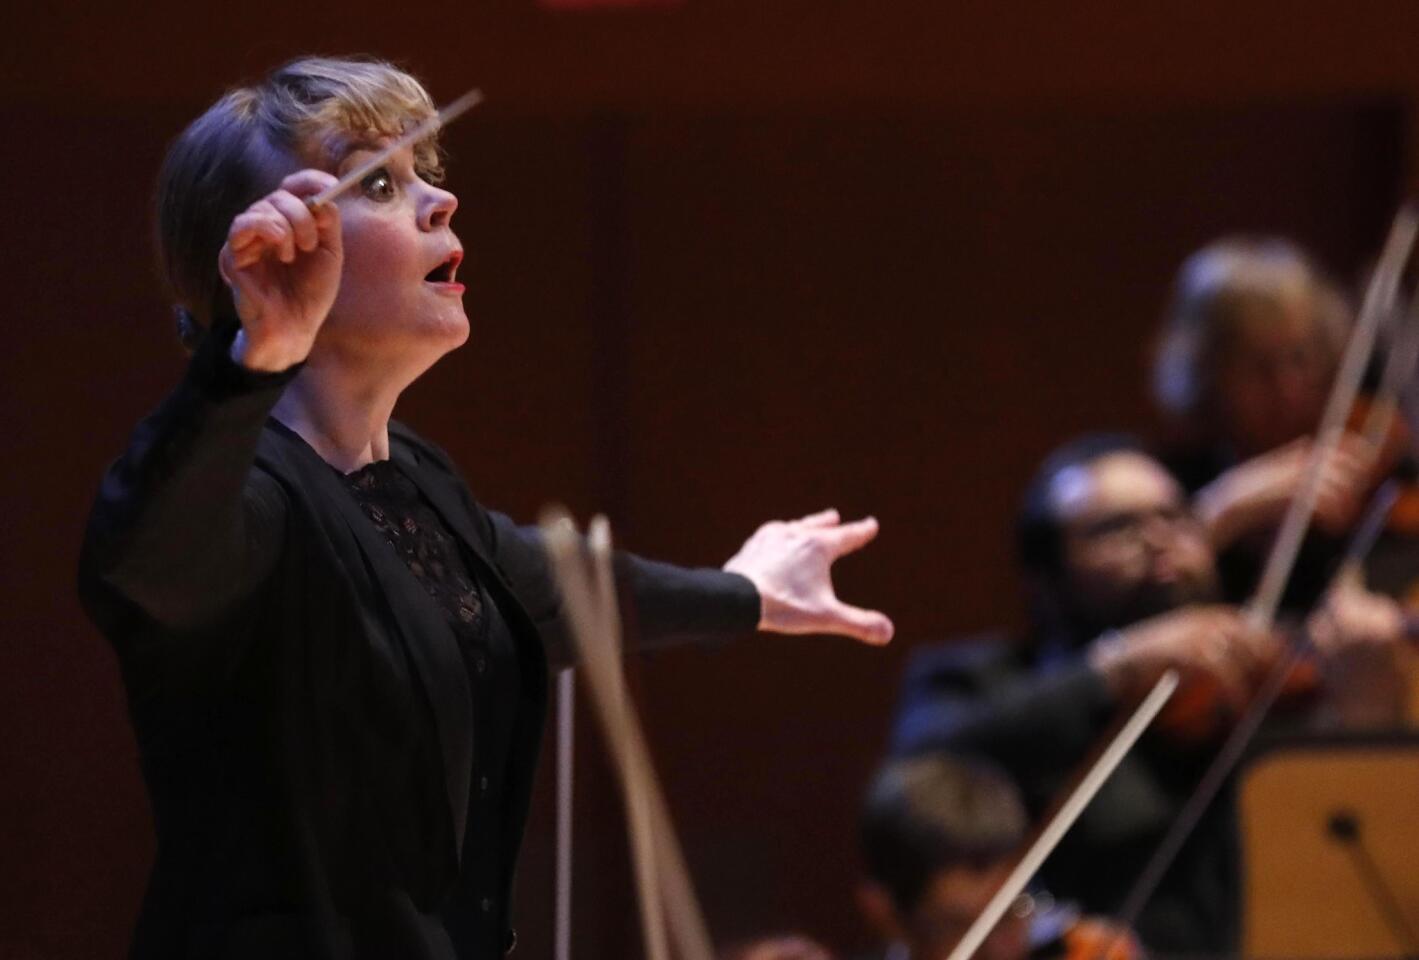 Susanna Malkki, the new principal guest conductor of the LA Phil, conducts the Los Angeles Philharmonic in a performance of Richard Strauss' "An Alpine Symphony, Op.64" at the Disney Concert Hall on Jan. 19.